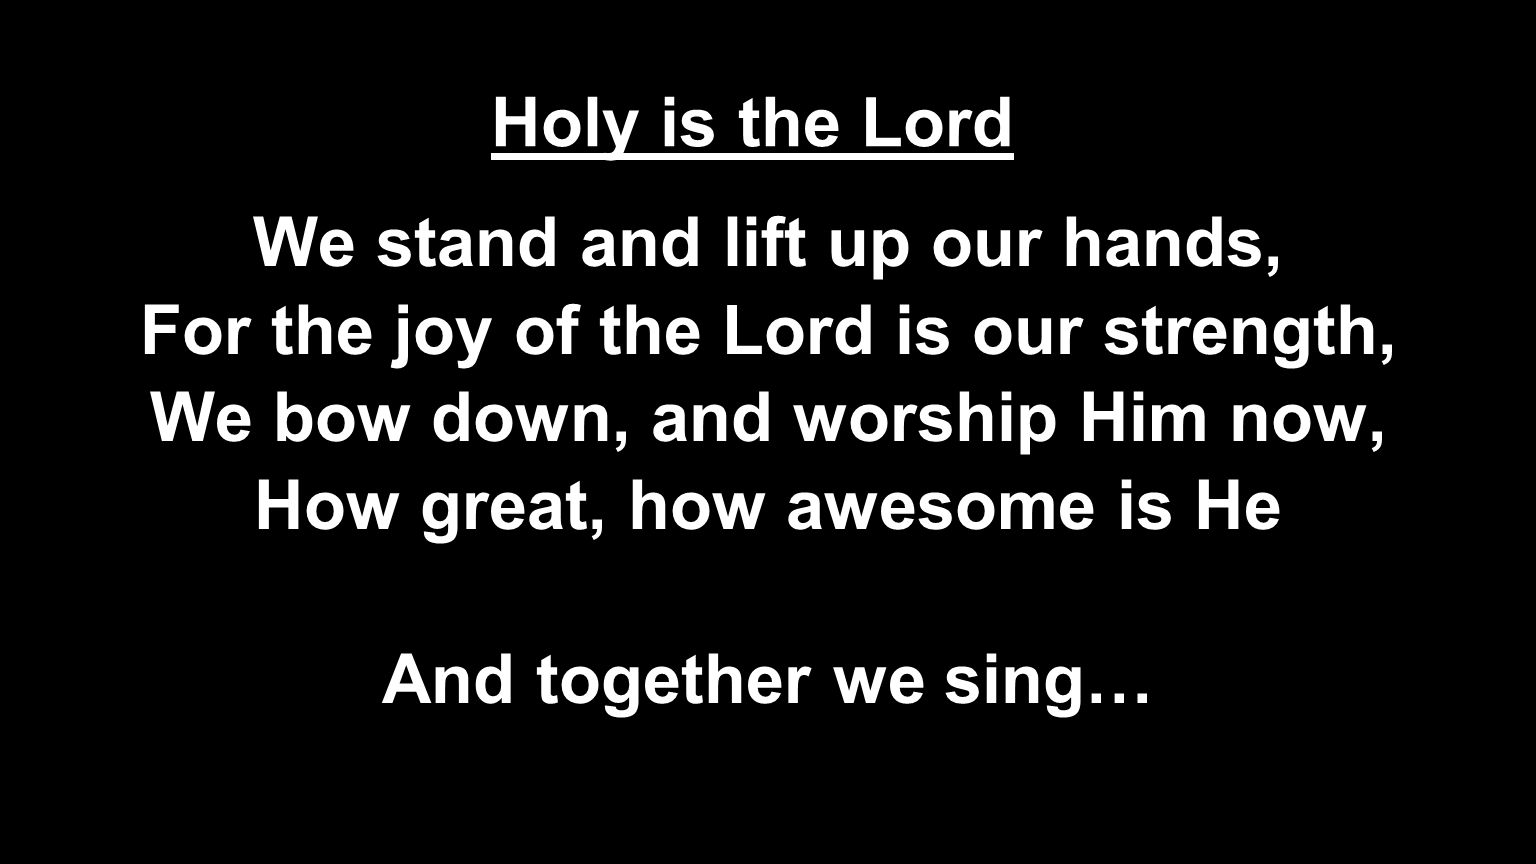 We stand and lift up our hands, For the joy of the Lord is our strength, We bow down, and worship Him now, How great, how awesome is He And together we sing… Holy is the Lord